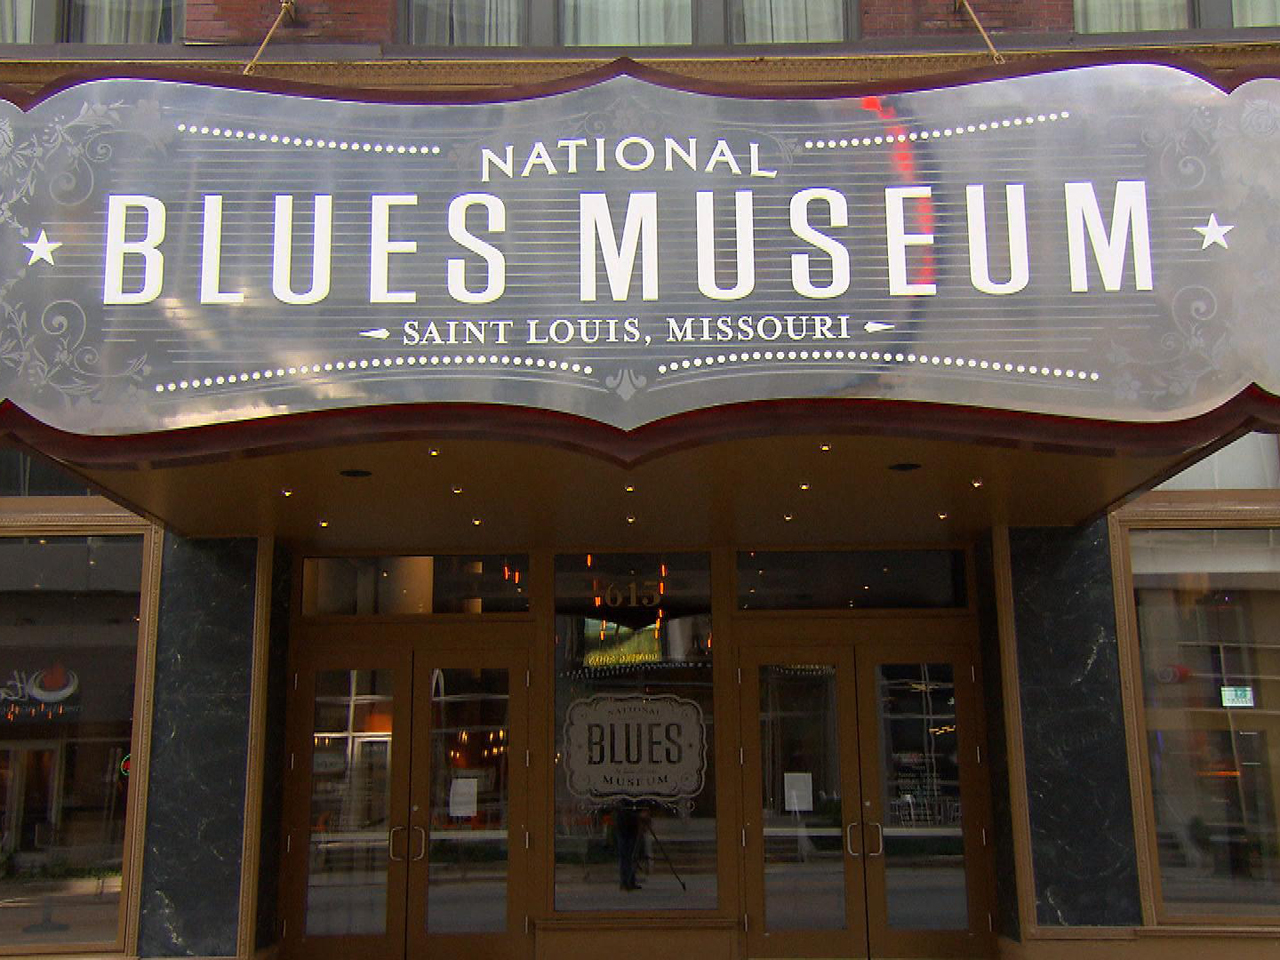 A new museum sings the blues - CBS News